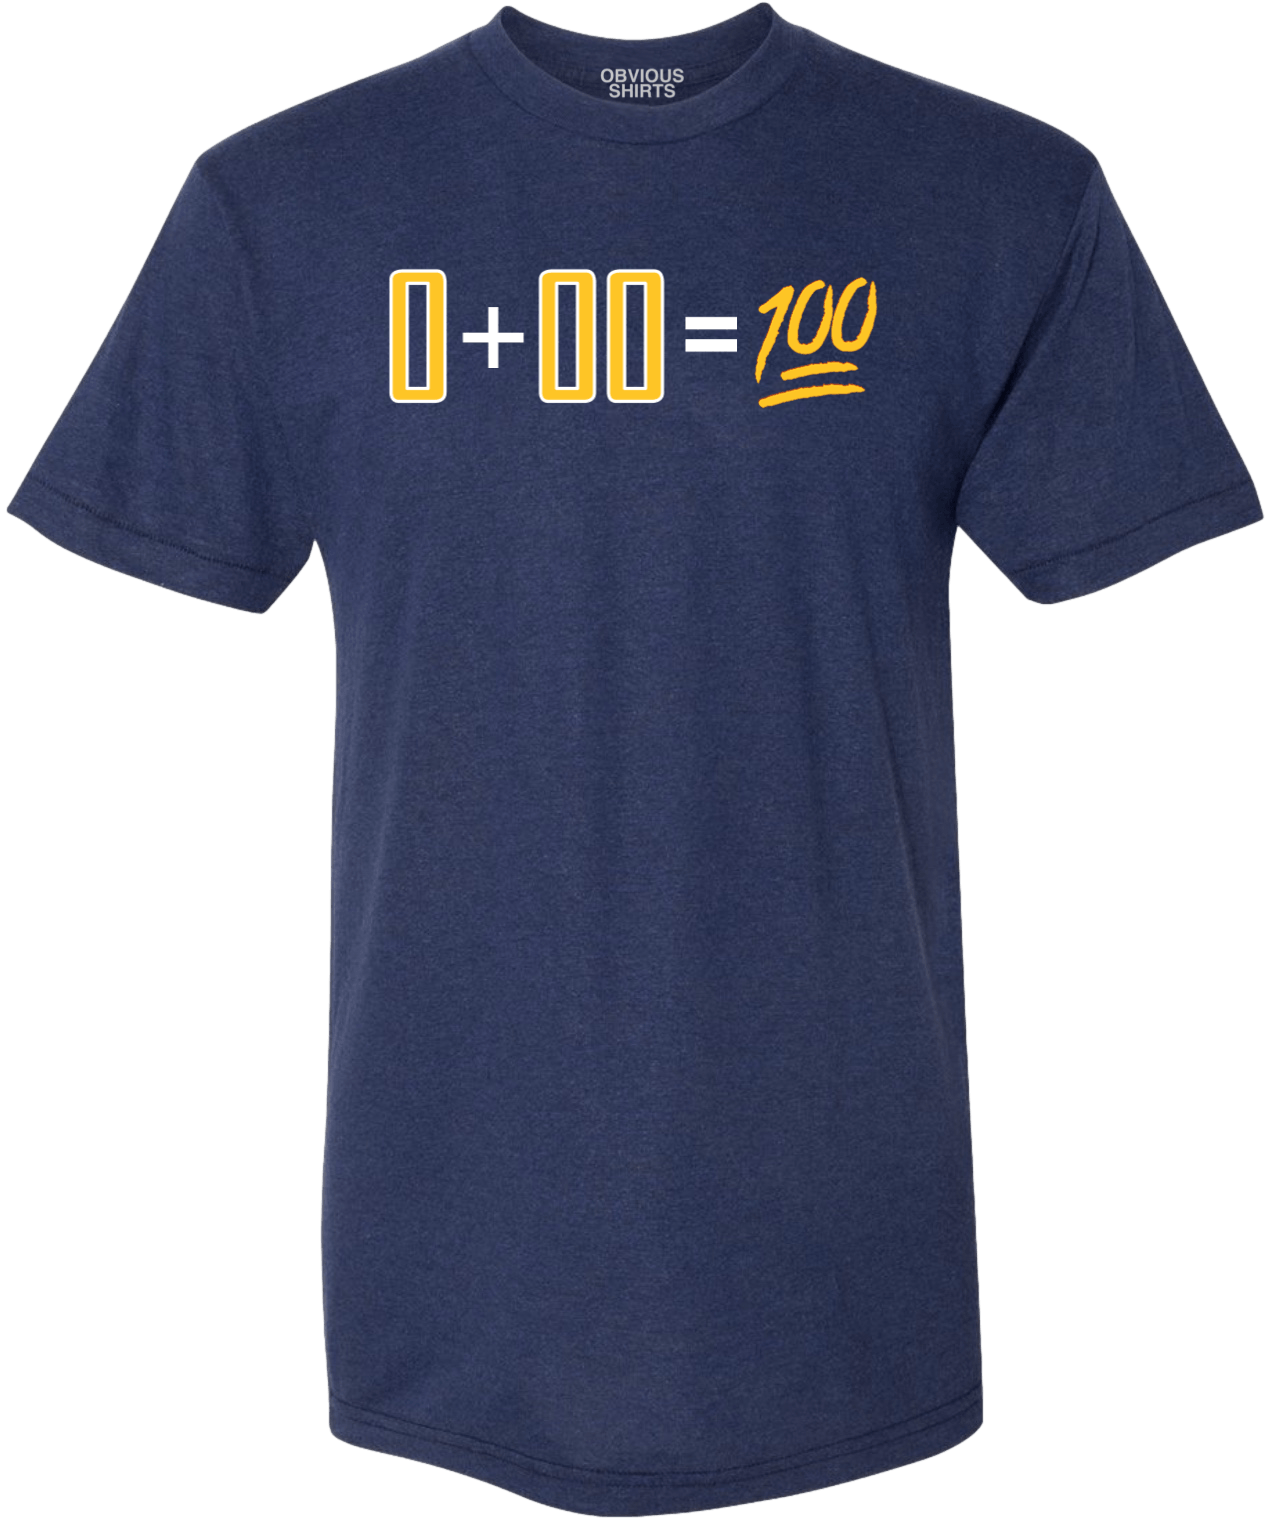 0+00=100 - OBVIOUS SHIRTS